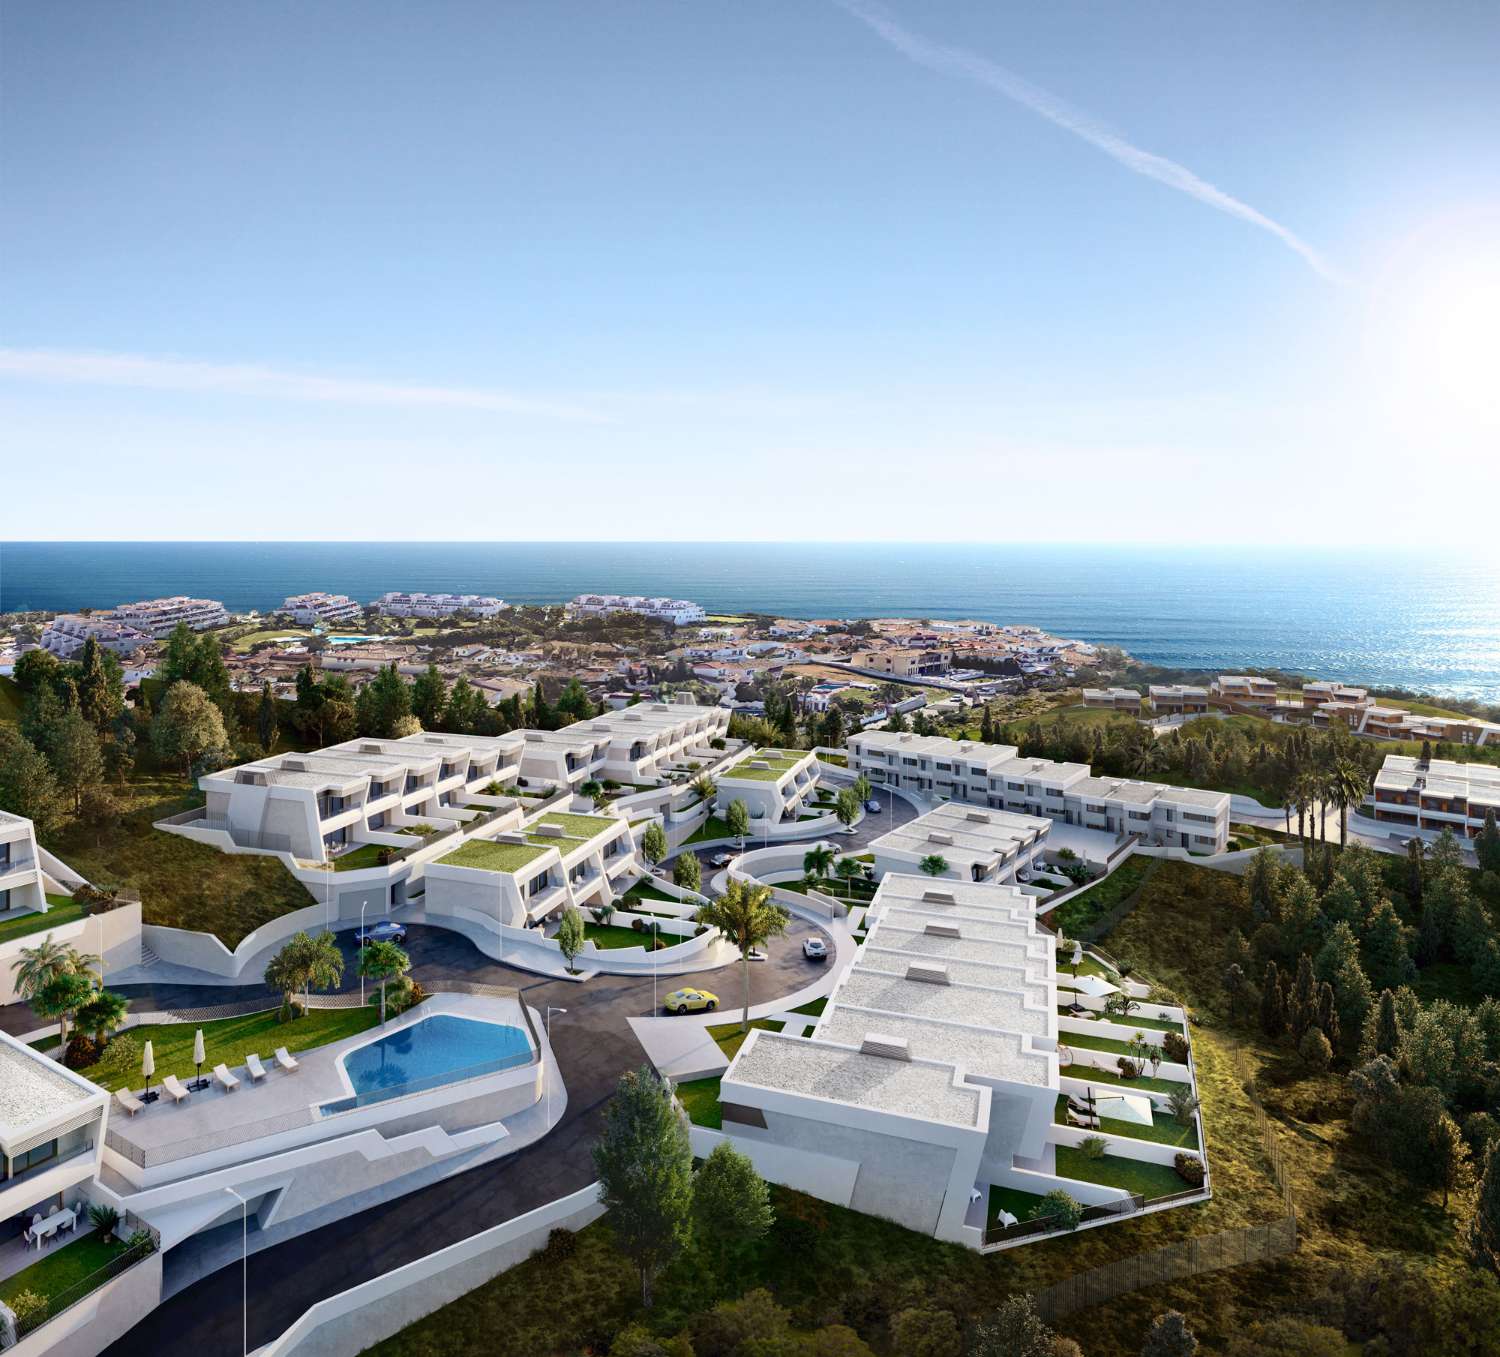 Townhouses with the best views of the Mediterranean in Mijas Costa